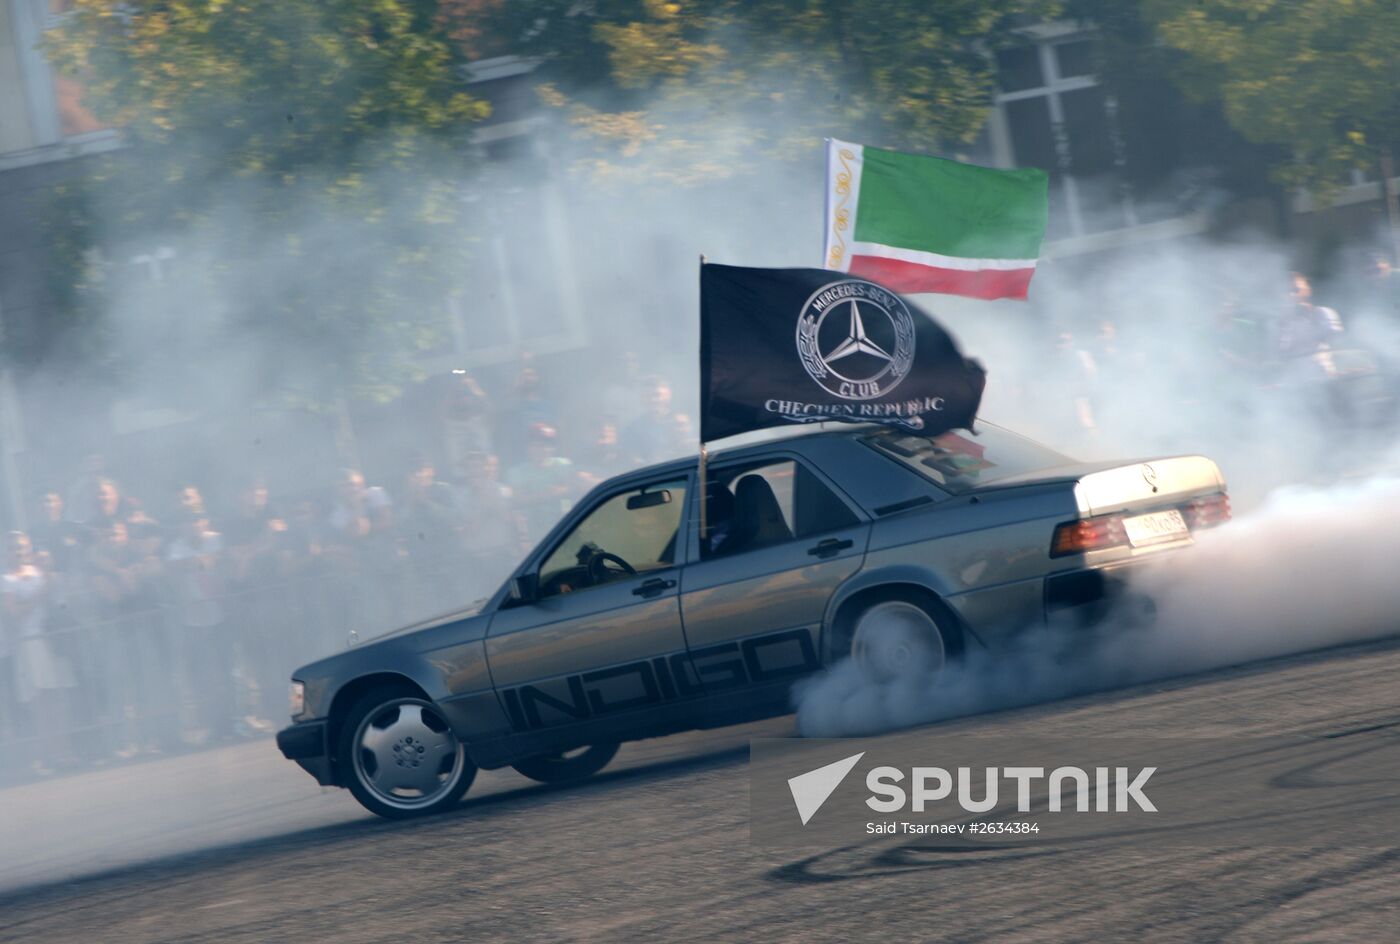 Drift show "Thanks for Victory" in Grozny